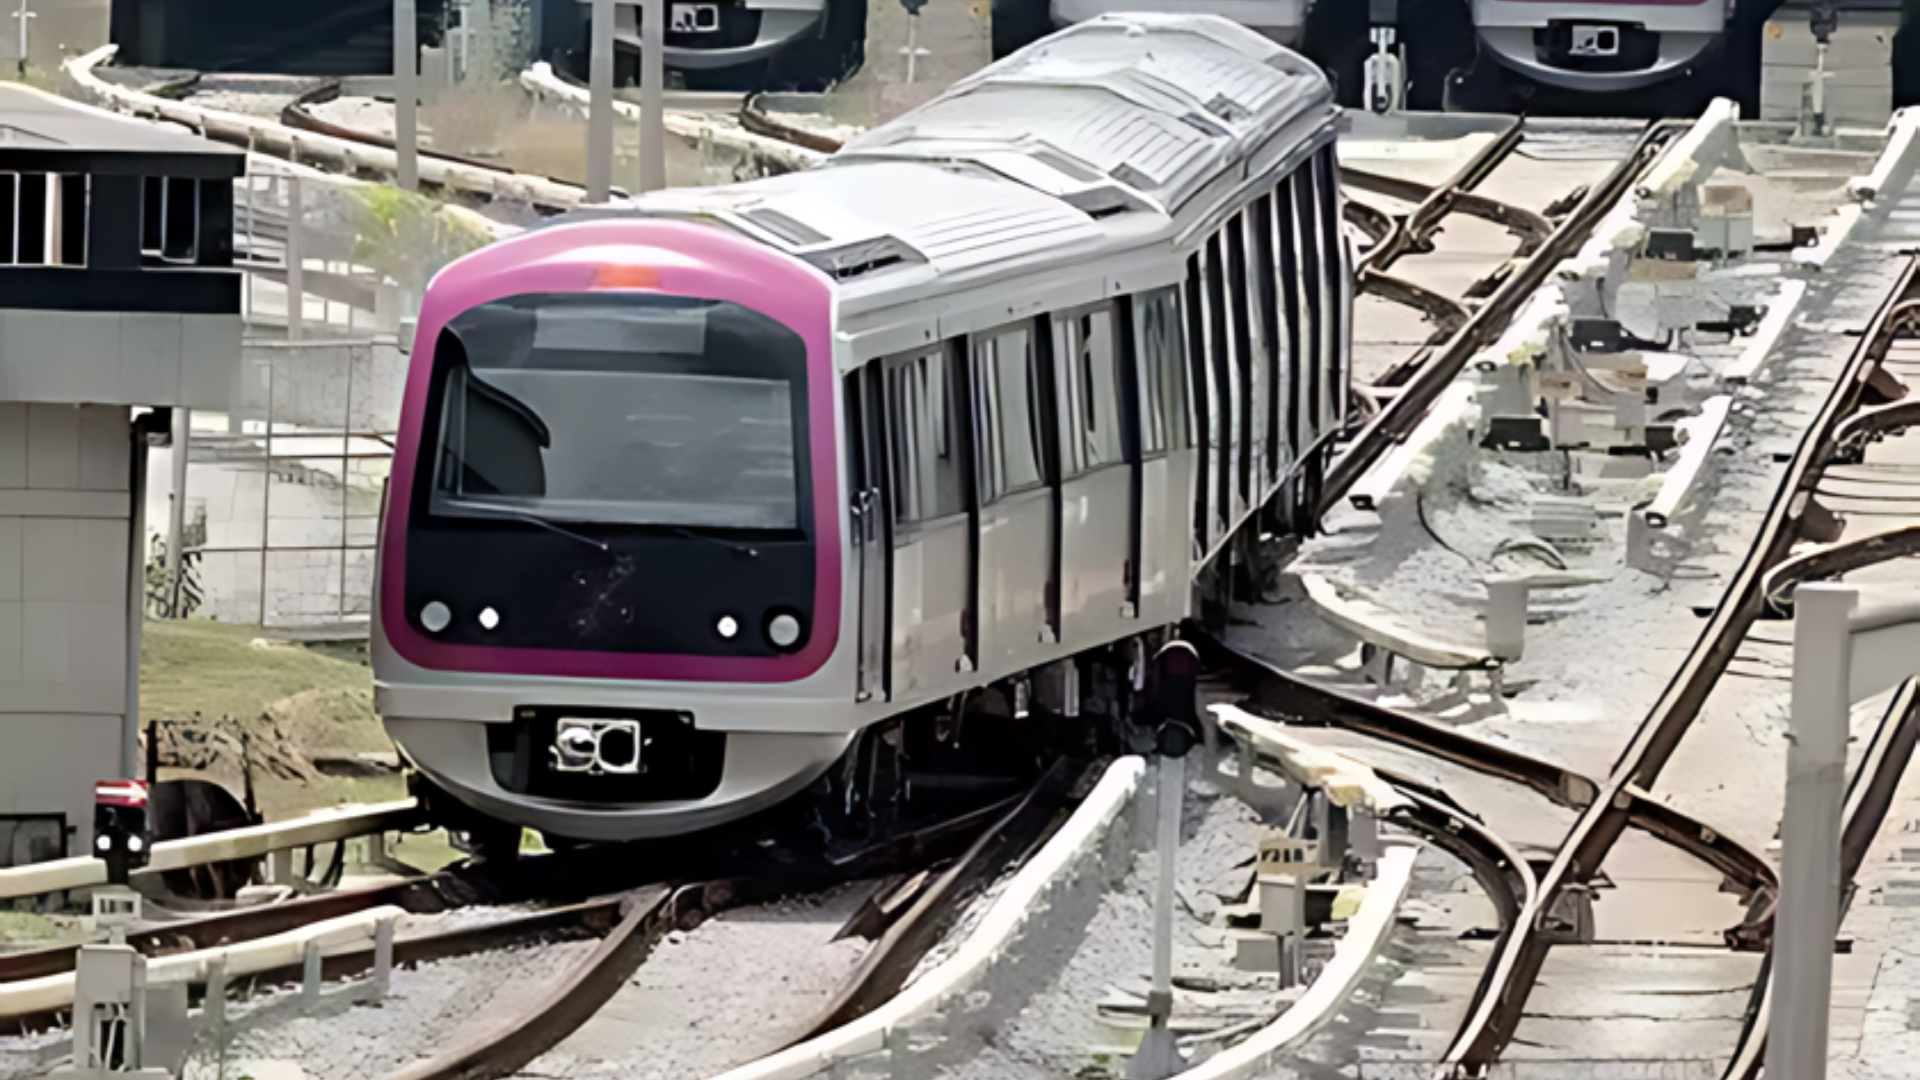 Bengaluru Metro Services Resume Following Interruption Caused By Fallen Tree Branch